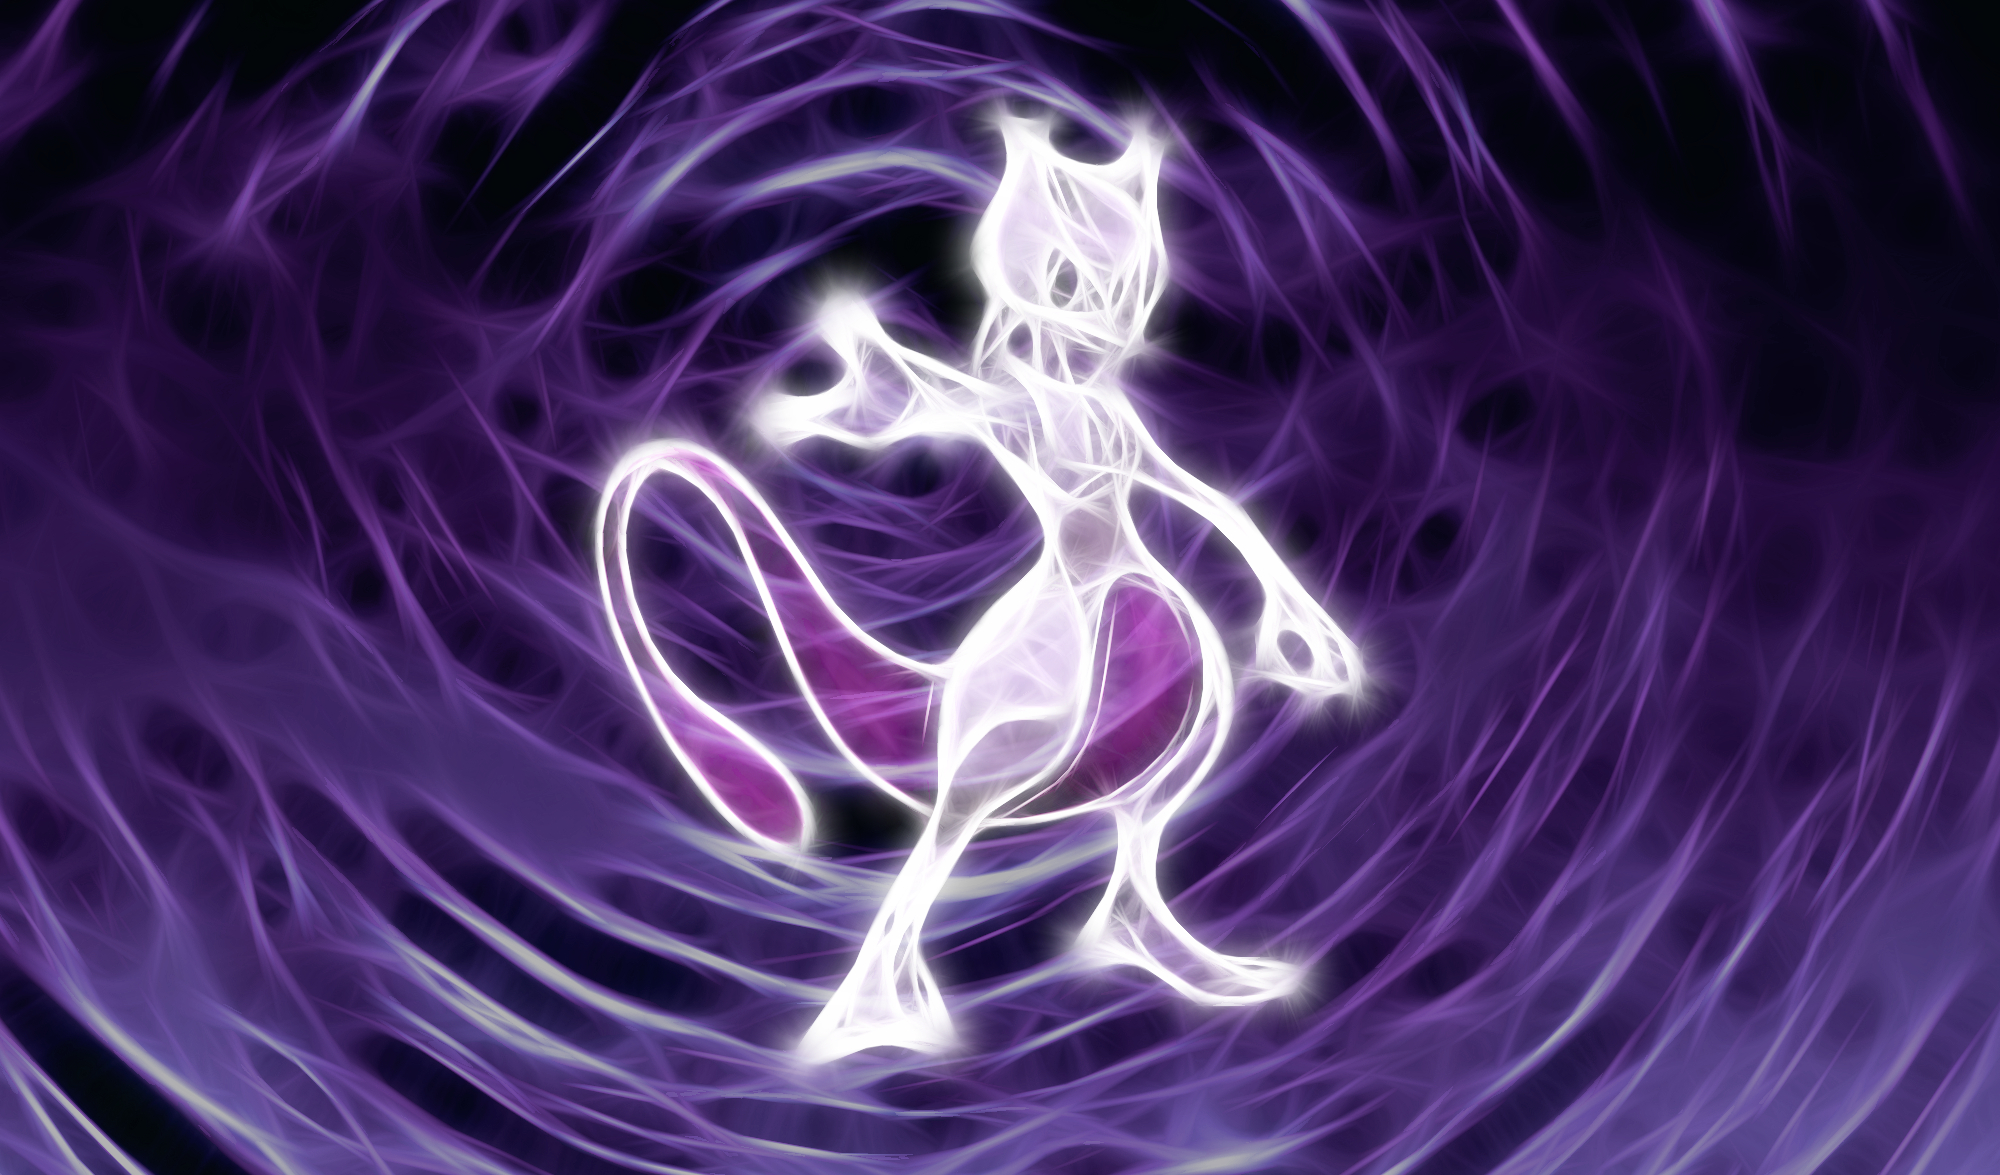 2000x1175 Free download Mewtwo Wallpaper by PorkyMeansBusiness [] for your Desktop, Mobile \u0026 Tablet | Explore 48+ Mewtwo Wallpapers | Pokemon Mew Wallpaper, Mew and Mewtwo Wallpaper, Mega Mewtwo Wallpaper